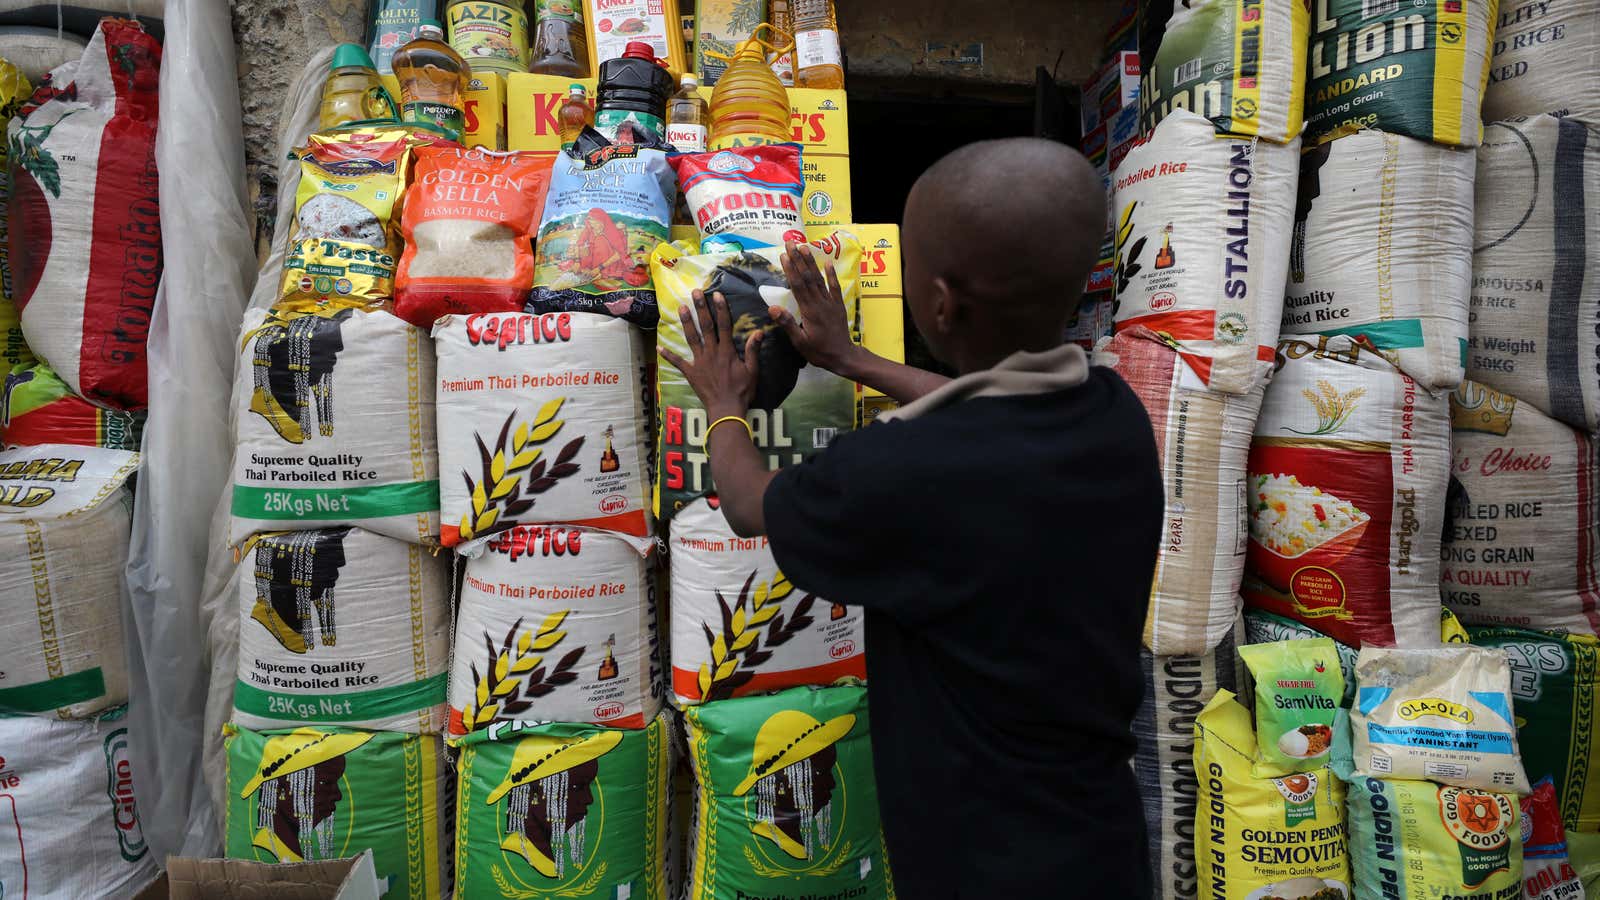 A vendor arranges bags of rice at the Wuse market in Abuja, Nigeria May 15, 2018. REUTERS/Afolabi Sotunde – RC1B6E918430